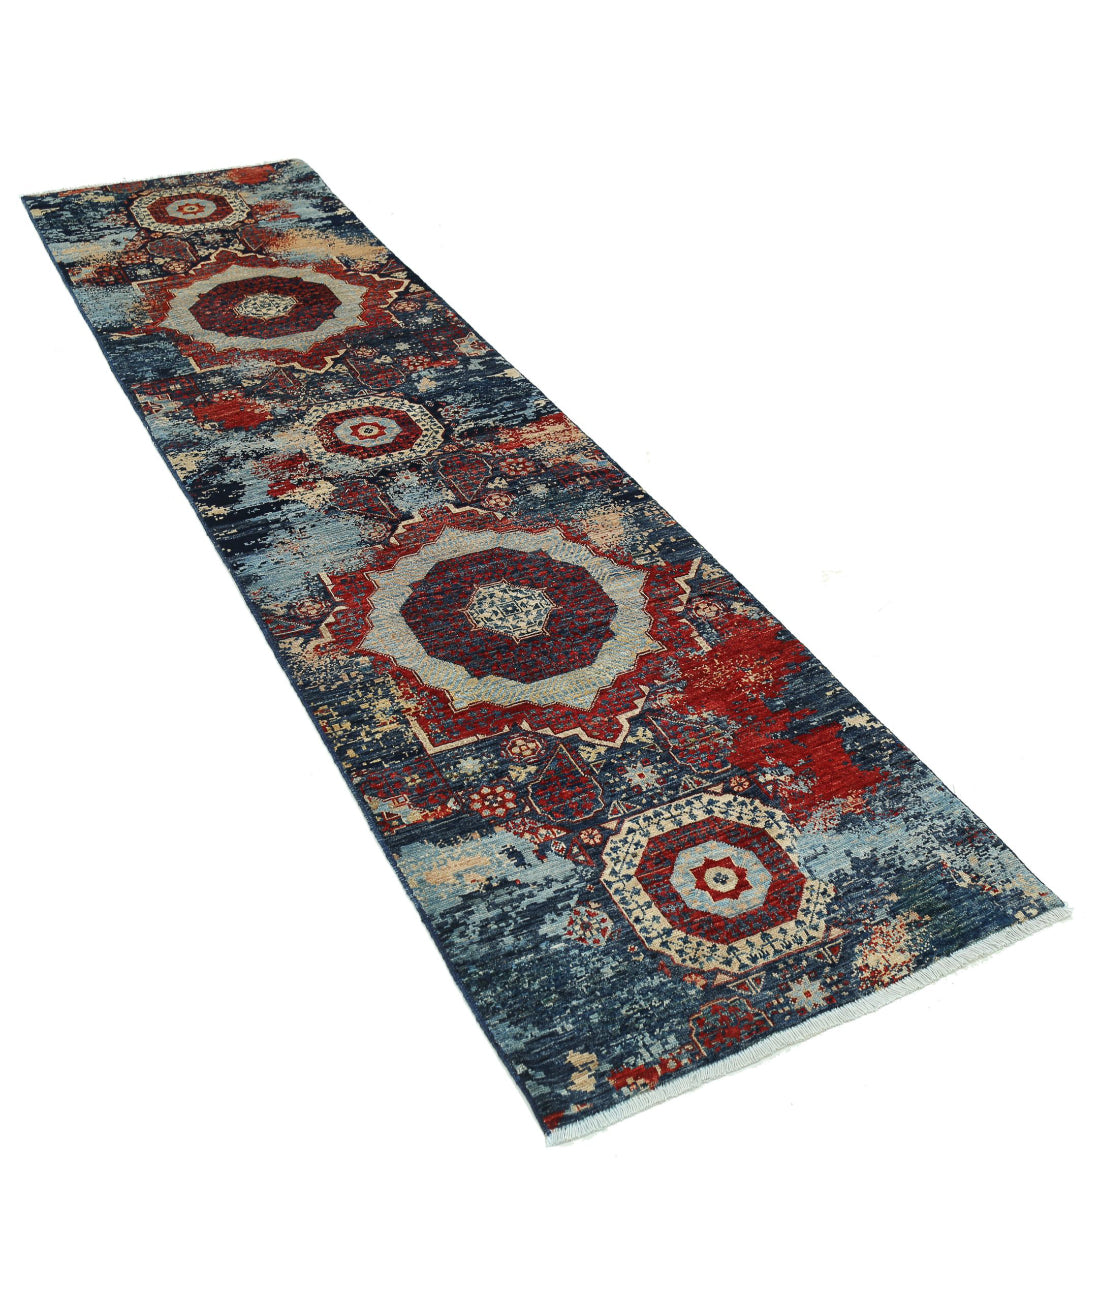 Hand Knotted Mamluk Wool Rug - 2'6'' x 9'7'' 2'6'' x 9'7'' (75 X 288) / Blue / Red